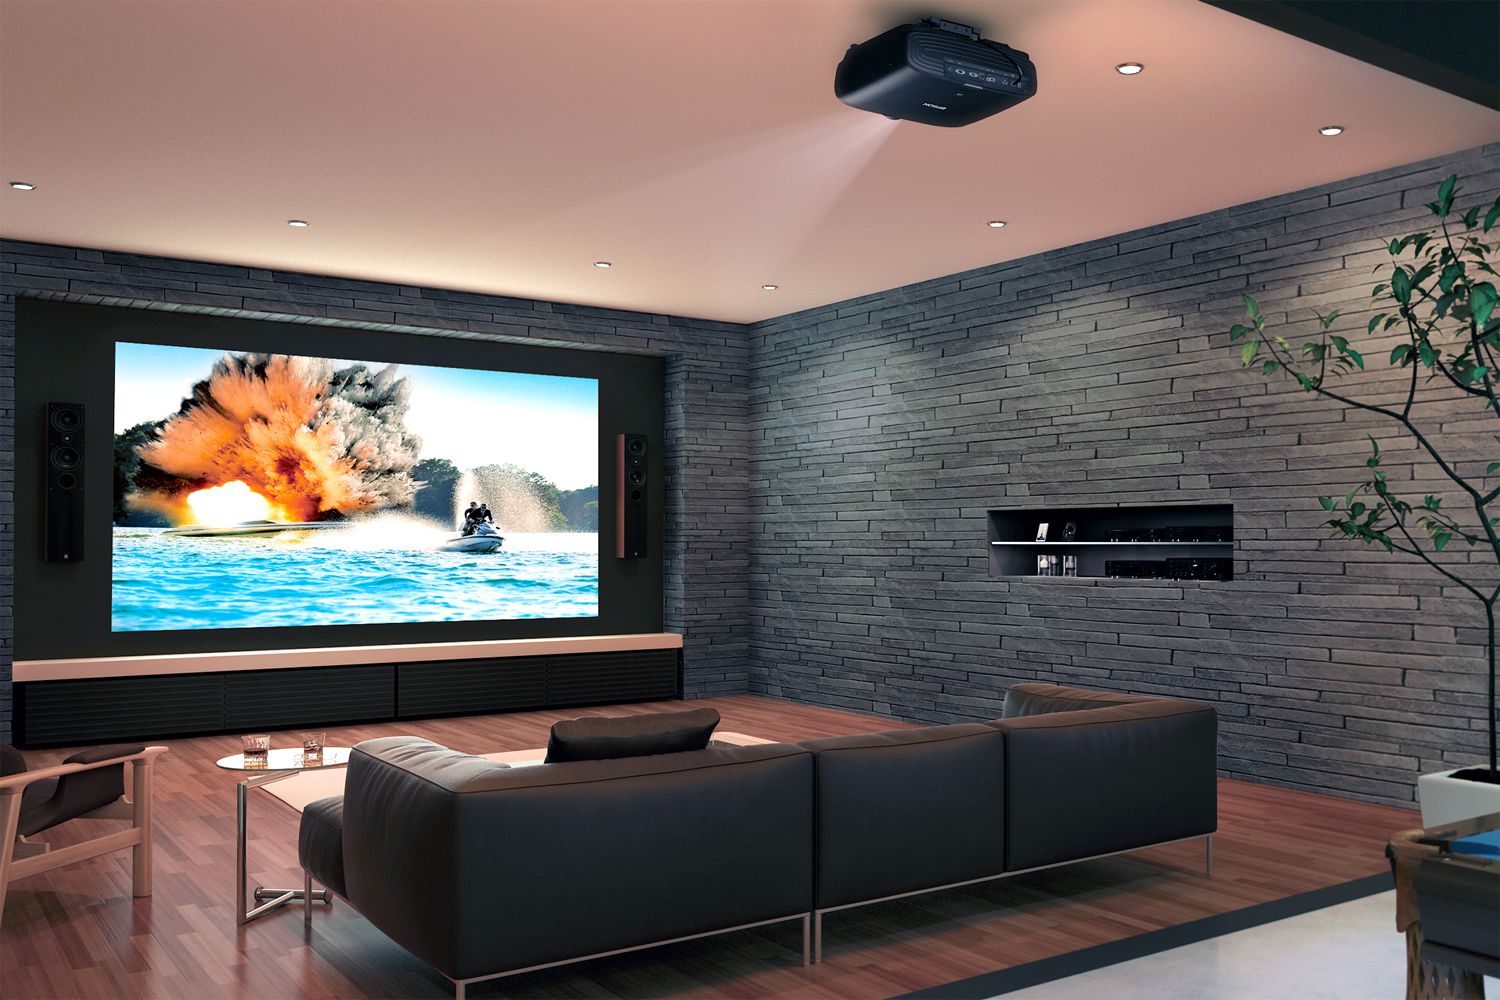 4K Video Projectors - What You Need To Know